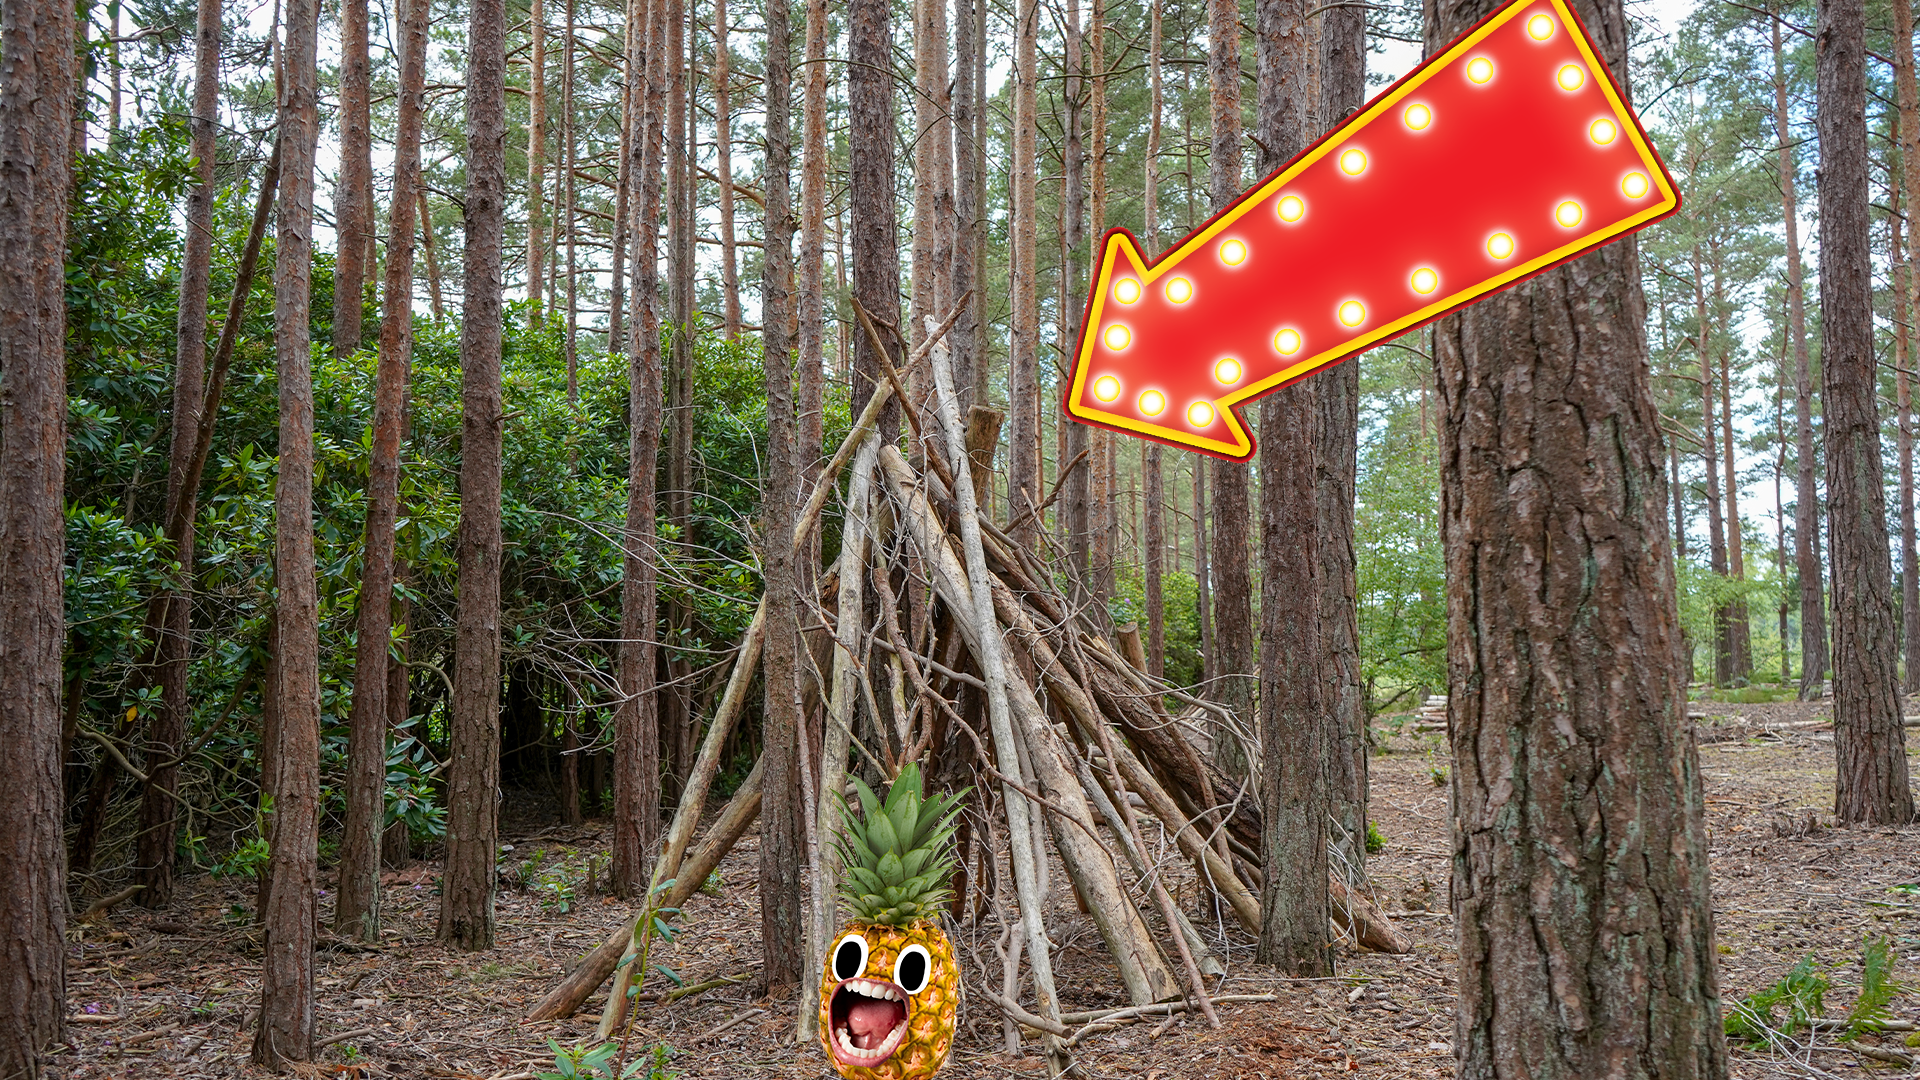 Stick shelter in forest with arrow and screaming pineapple